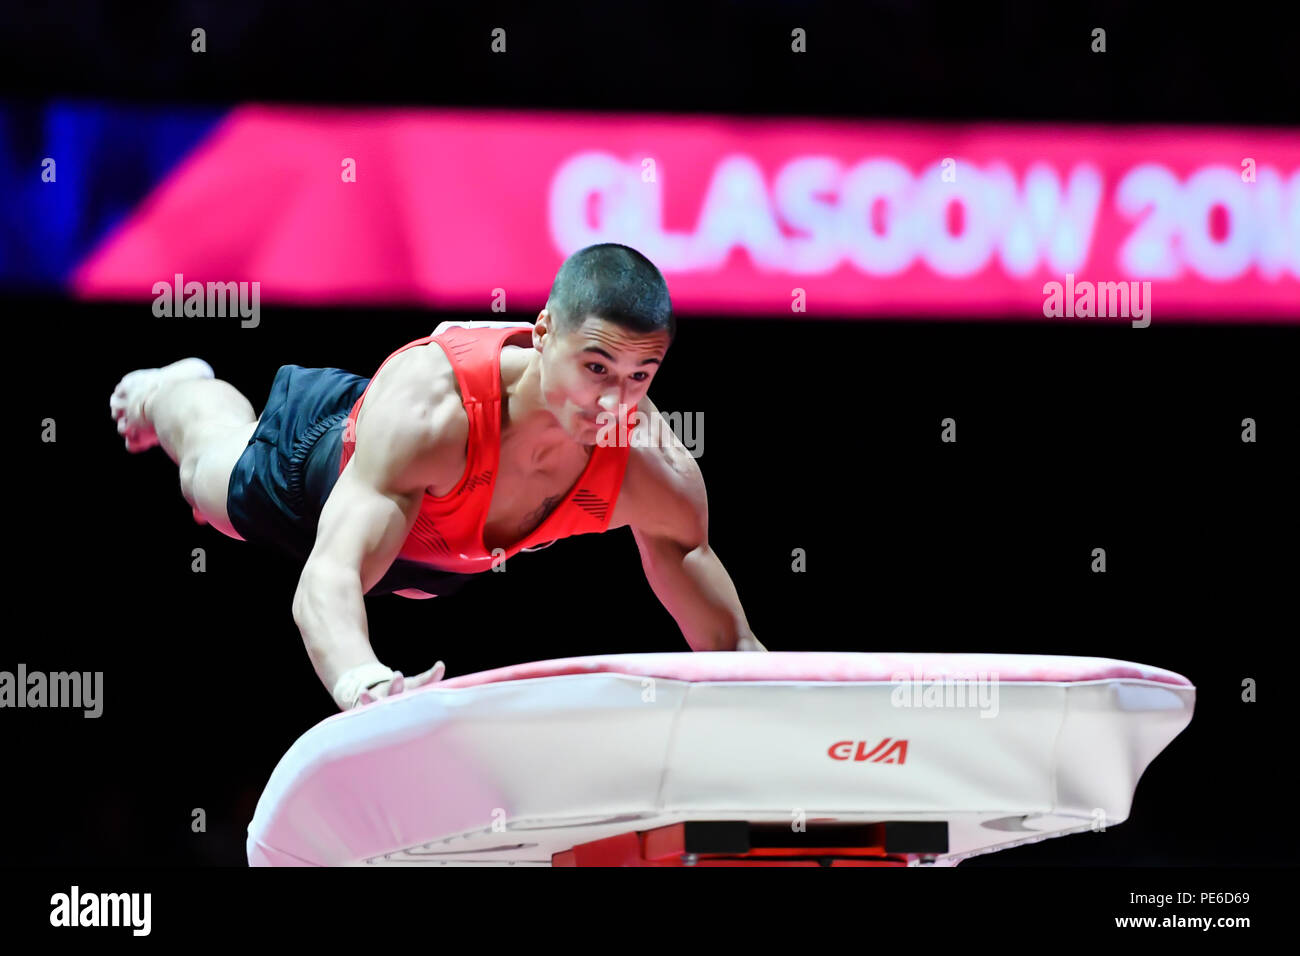 Glasgow, Scotland, UK. 12th August 2018. competes on the Vault in Men's Artistic Gymnastics Apparatus Finals during the European Championships Glasgow 2018 at The SSE Hydro on Sunday, 12  August 2018. GLASGOW SCOTLAND. Credit: Taka G Wu Stock Photo